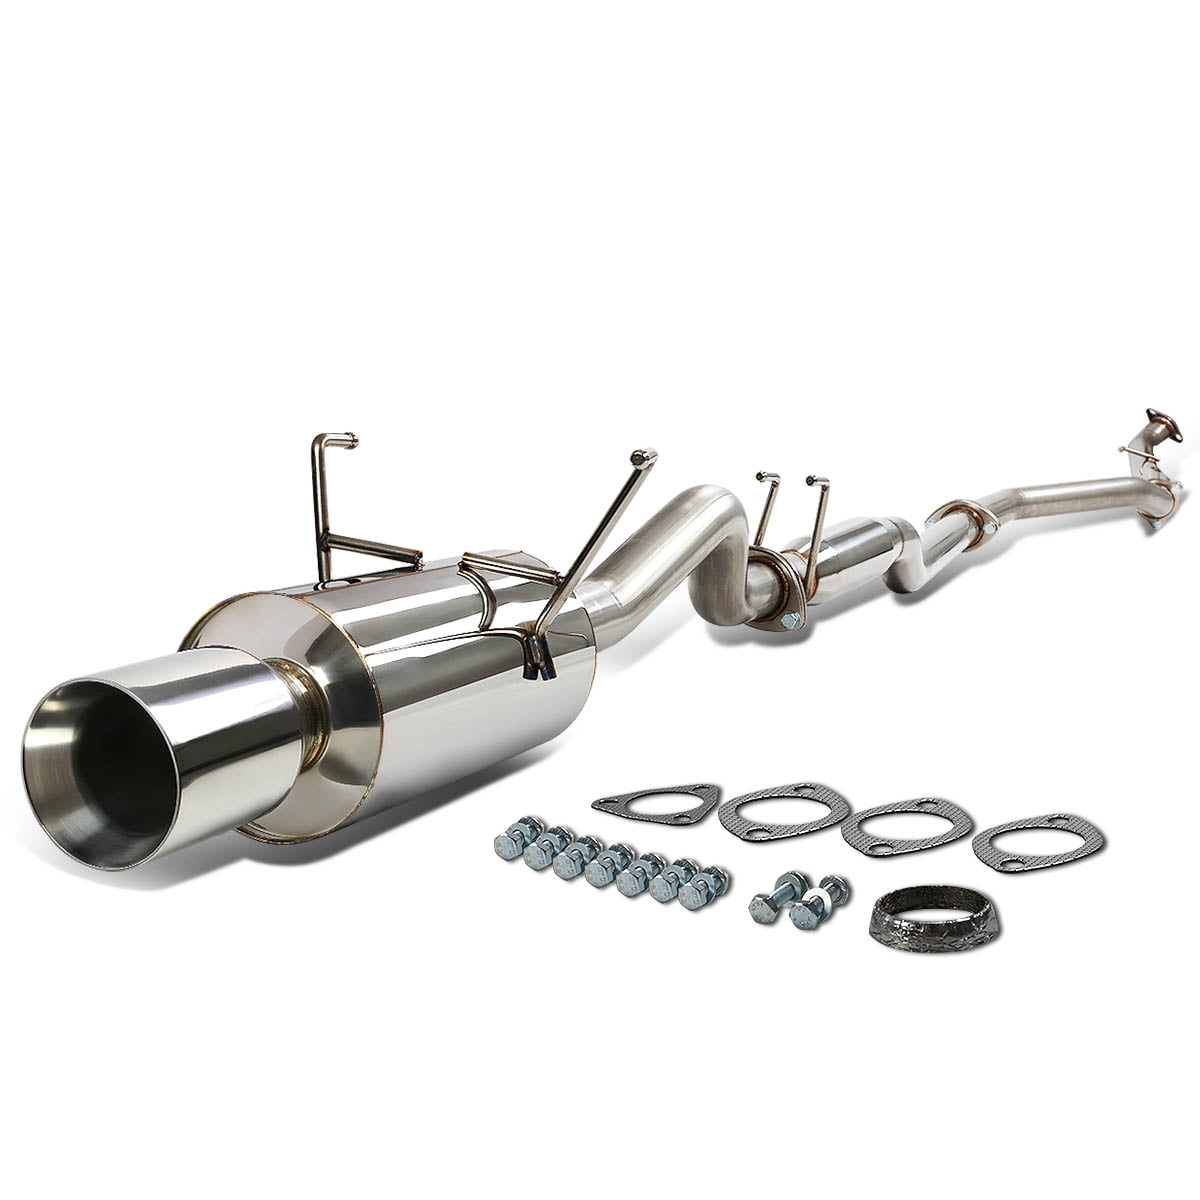 Yonaka 01-05 Honda Civic Catback Exhaust Stainless Steel System 2DR 4DR 1.7L